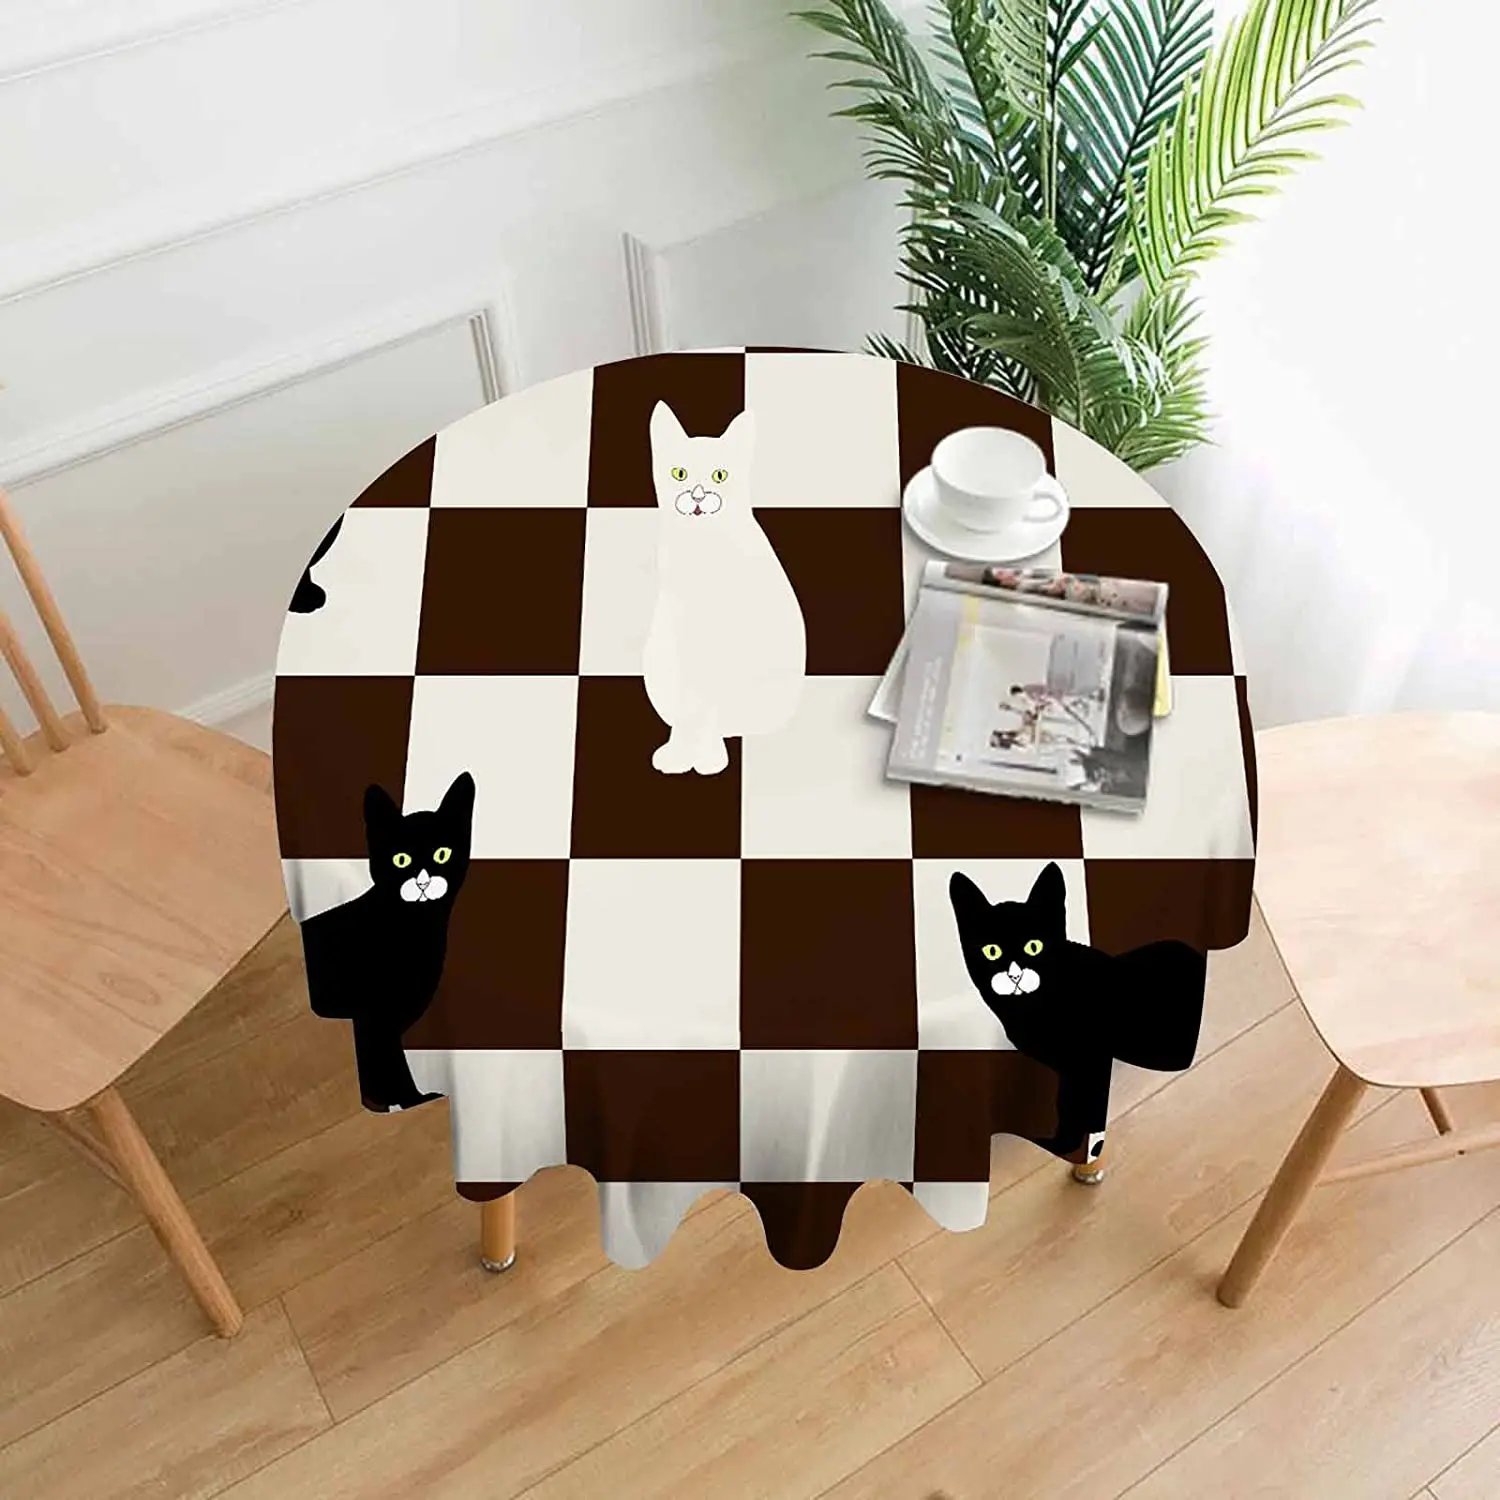 

Kittens Round Tablecloth 60 Inch Black White Chessboard Cats Tartan Table Clothes for Dining Table Christmas Halloween Decor